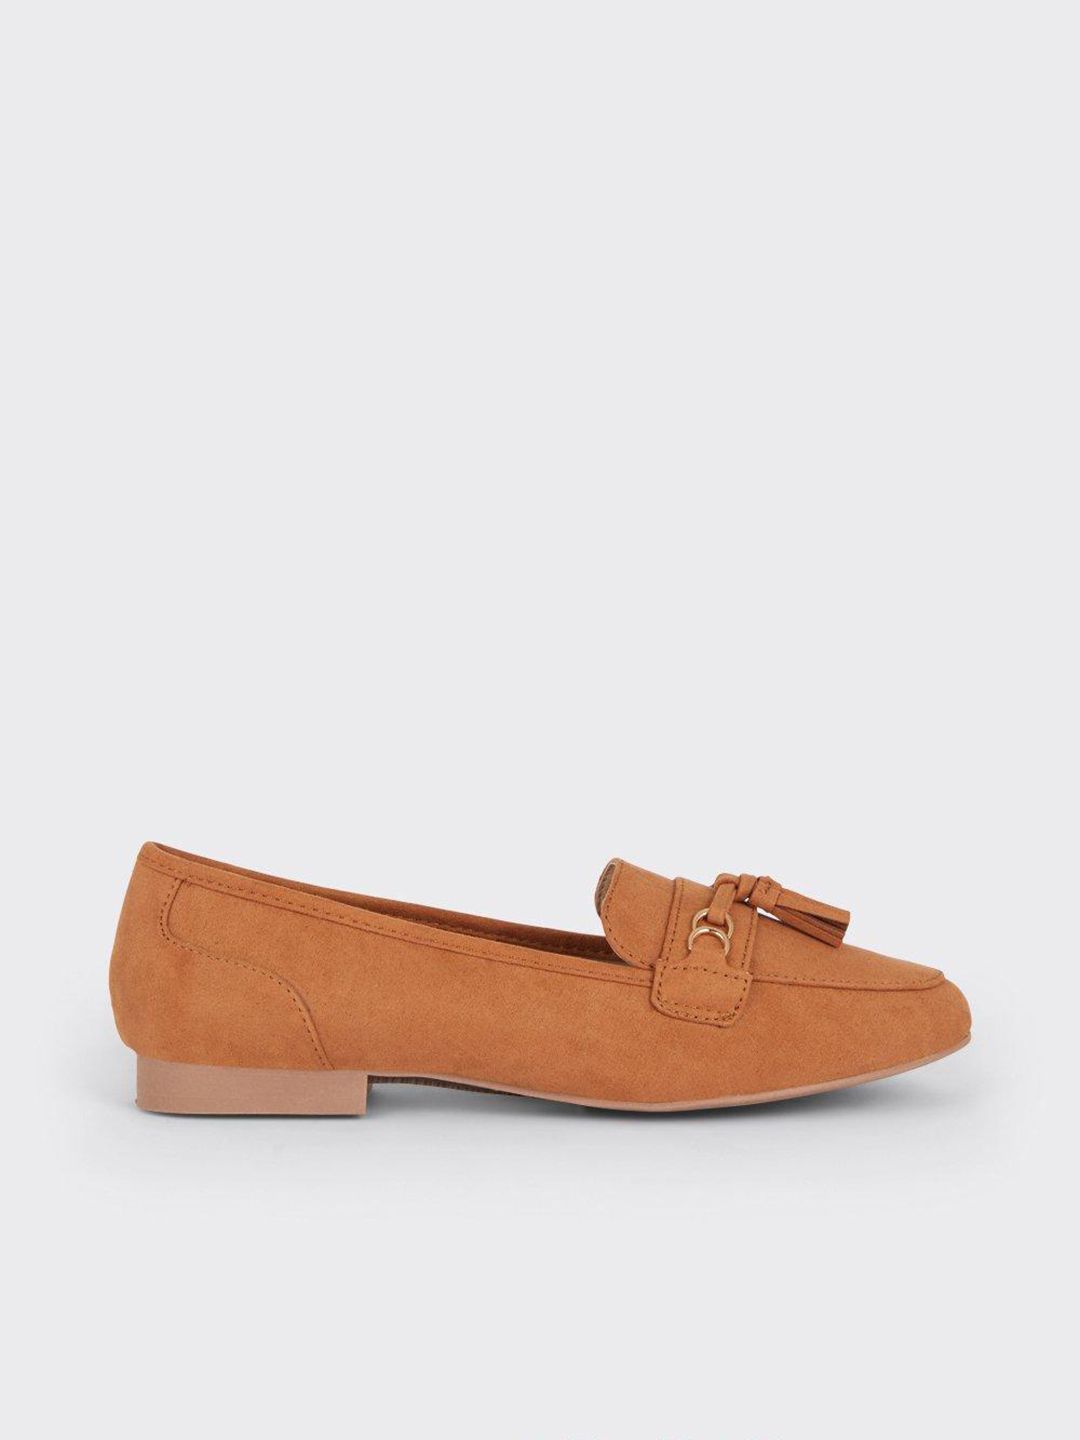 DOROTHY PERKINS Women Tan Leather Loafers Price in India